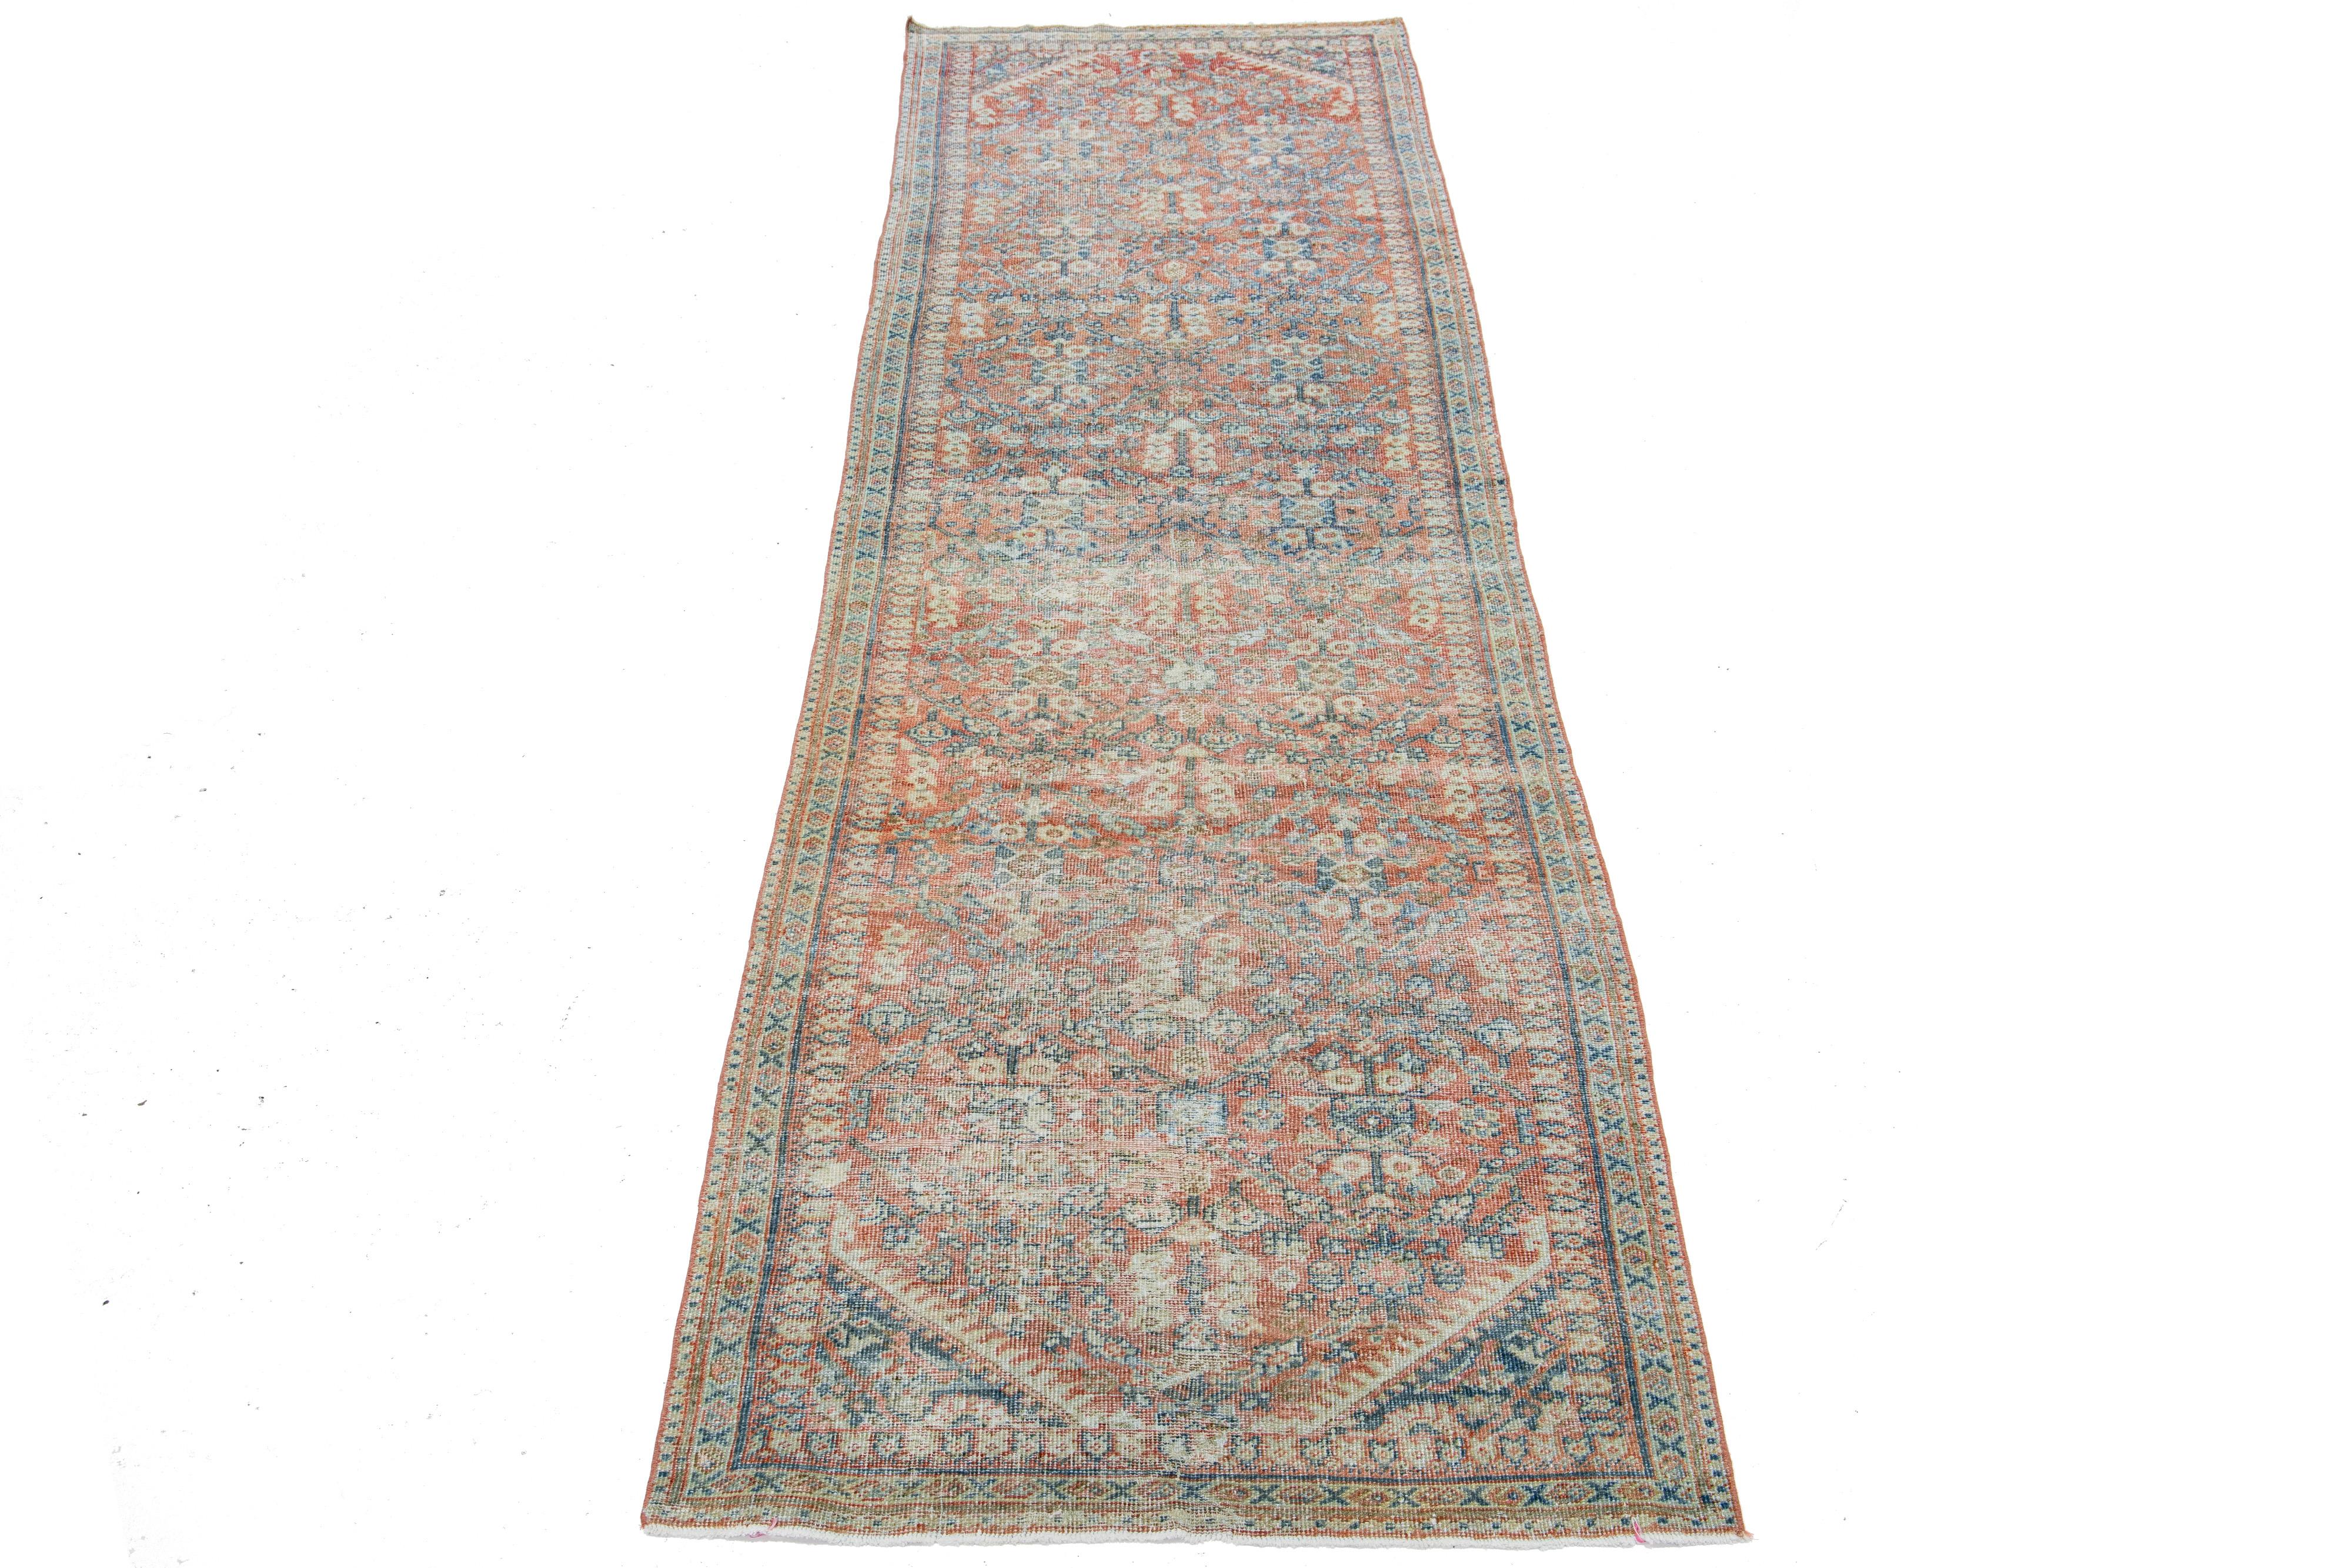 This 1920s mahal wool rug boasts a red-rust main field, highlighted by blue, beige, and brown in an all-over floral pattern, creating a classic look.

This rug measures 3'2